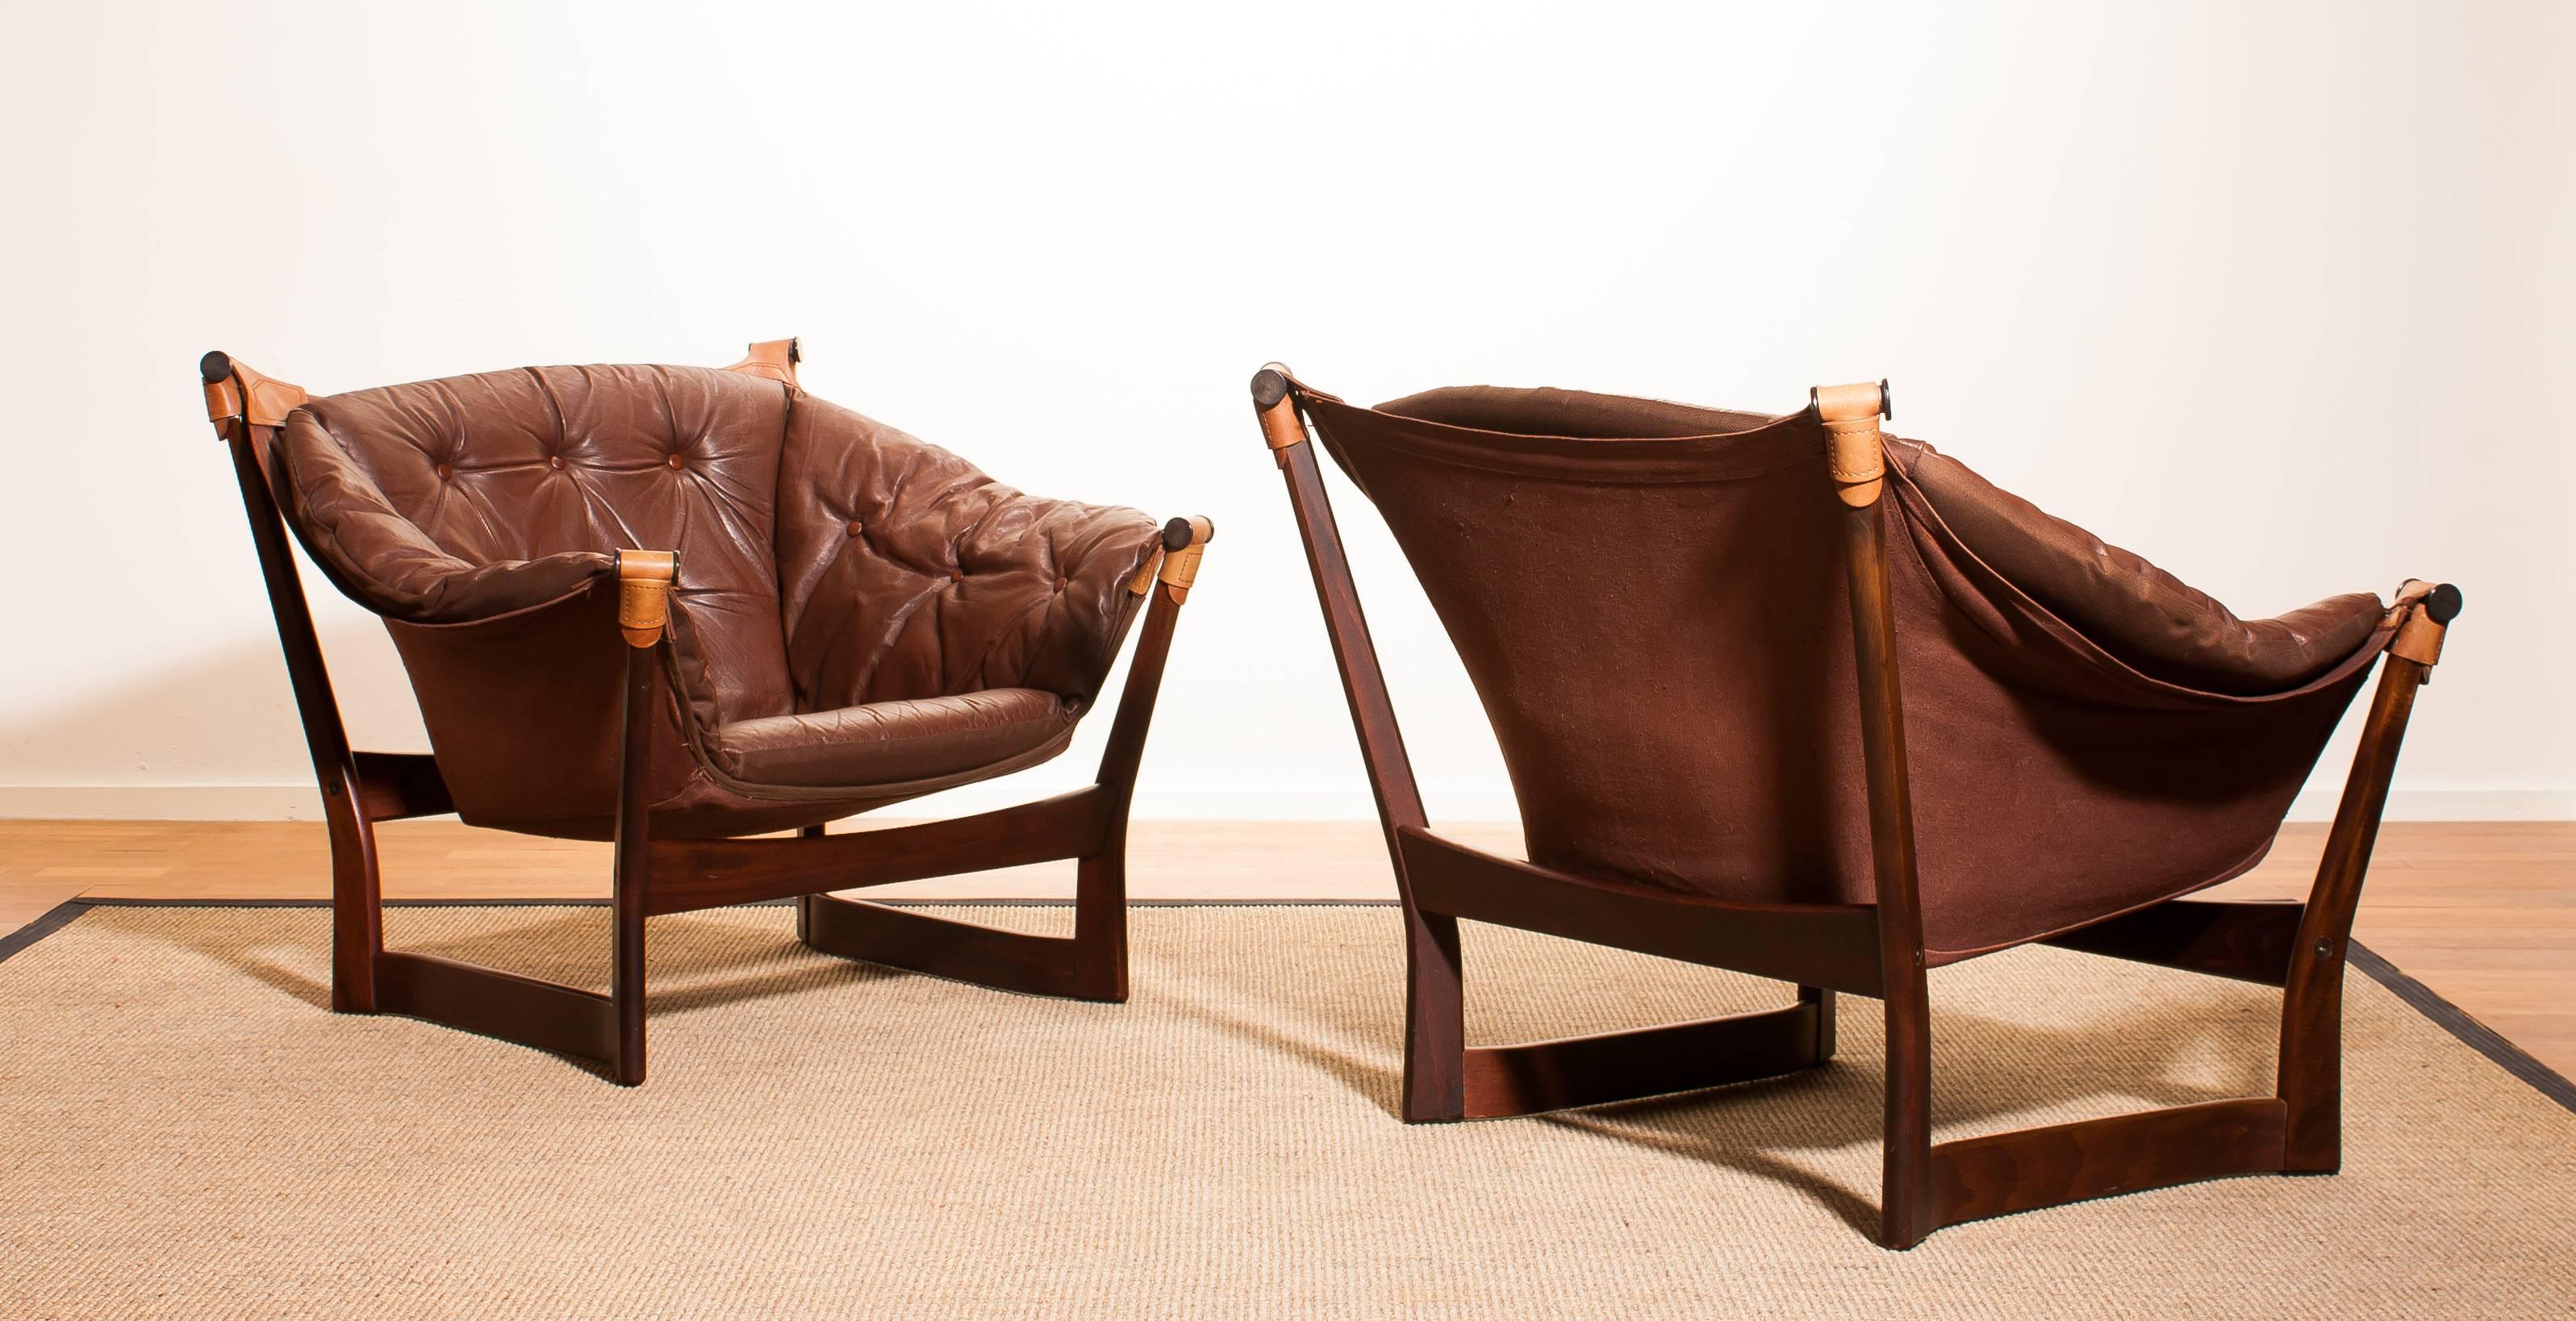 Mid-20th Century 1950s, Teak and Leather Pair 'Trega' Chairs by Tormod Alnaes for Sørliemøbler